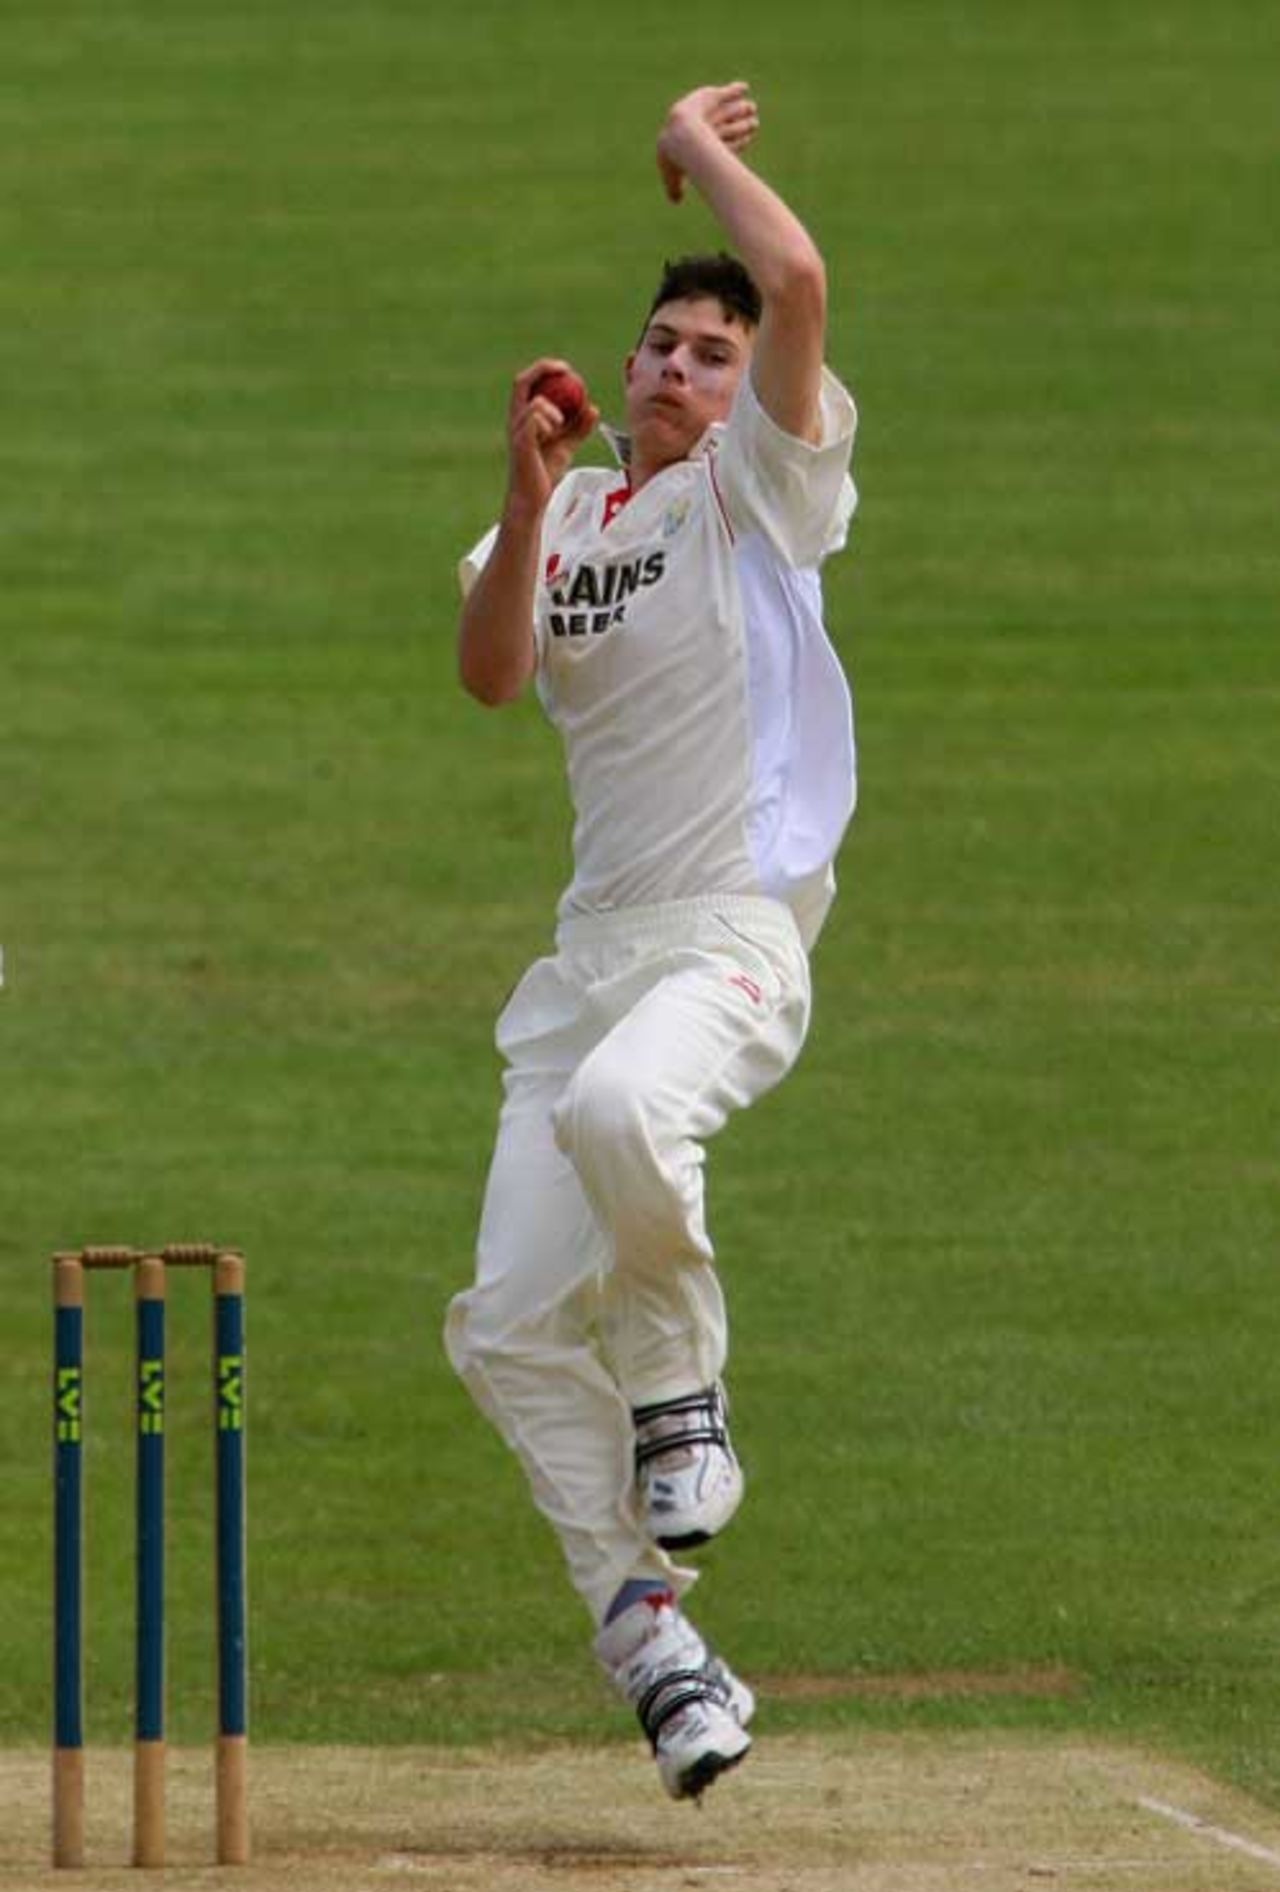 James Harris, Glamorgan's 17-year-old bowling star, in action against Gloucestershire, Glamorgan v Gloucestershire, County Championship, Division Two, Bristol, May 19, 2007